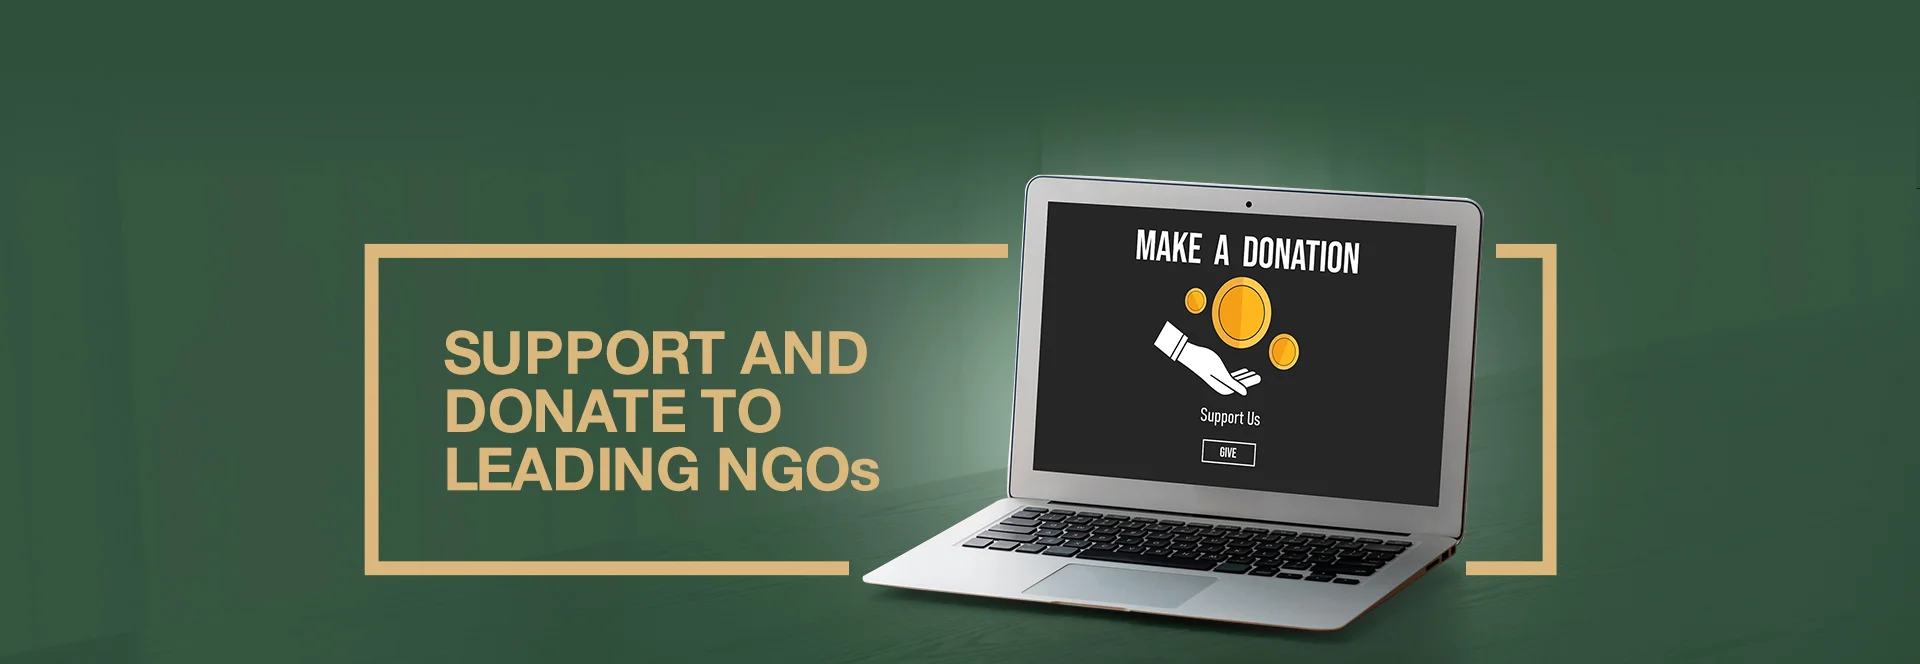 Support and donate to leading NGOs